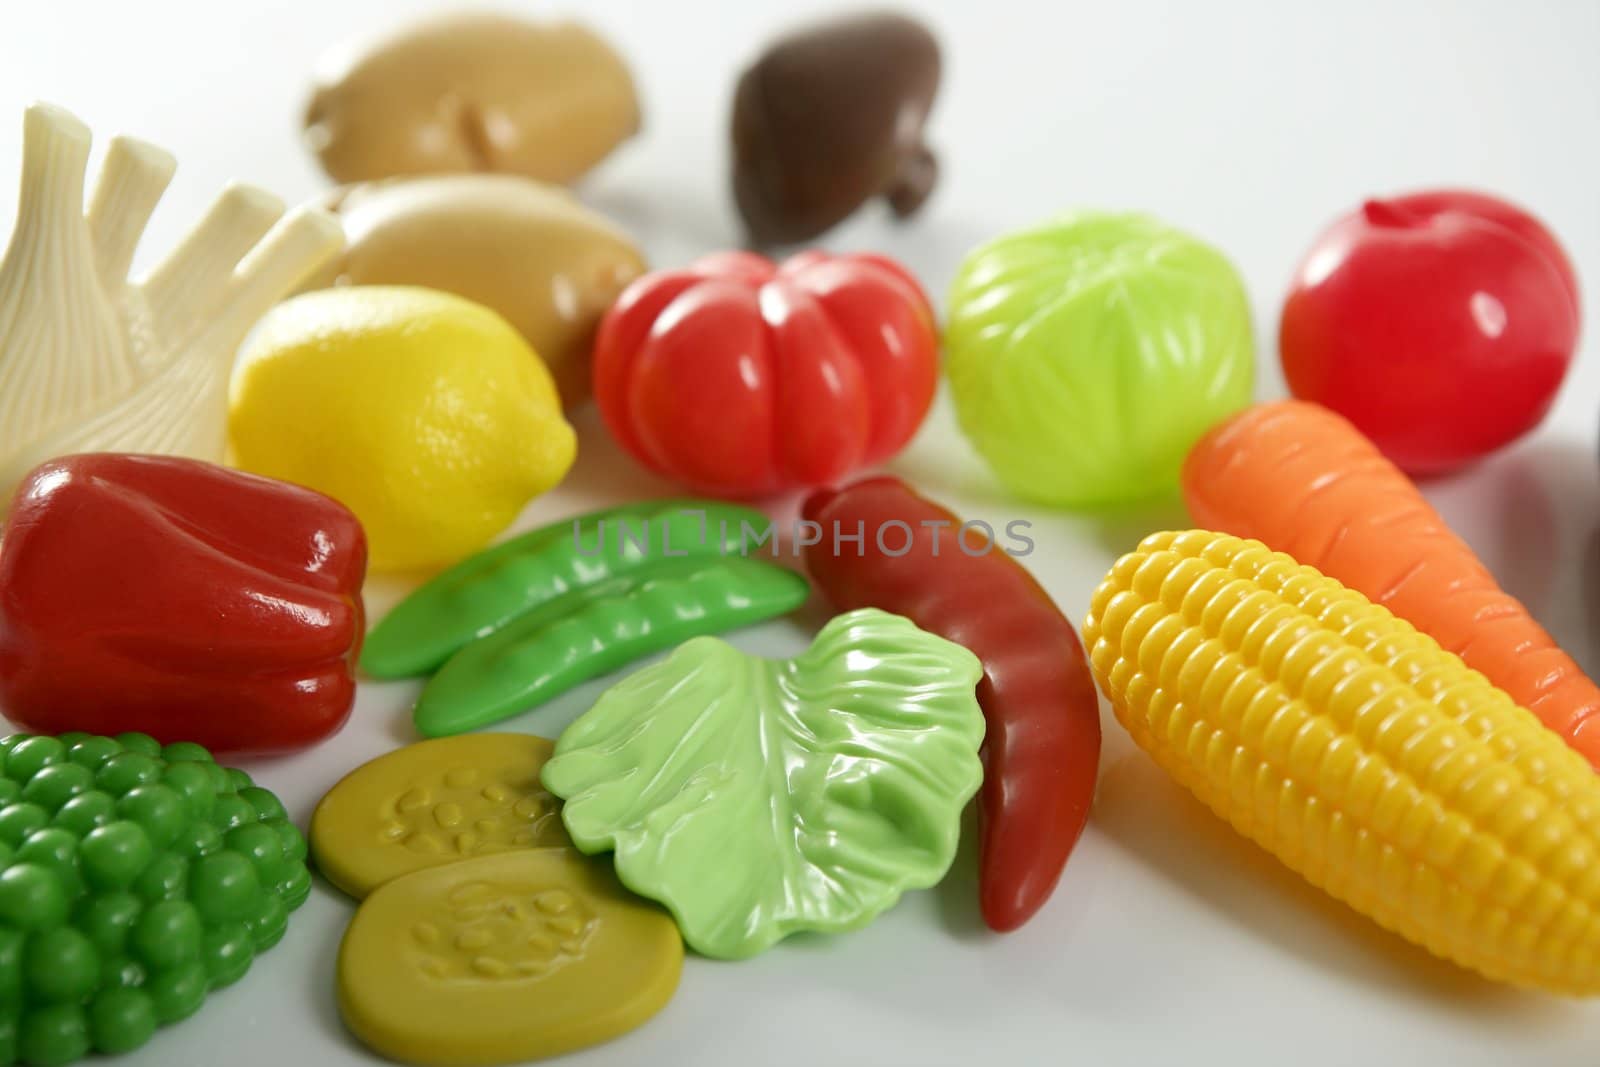 Plastic game, fake varied vegetables and fruits. Children food education toy